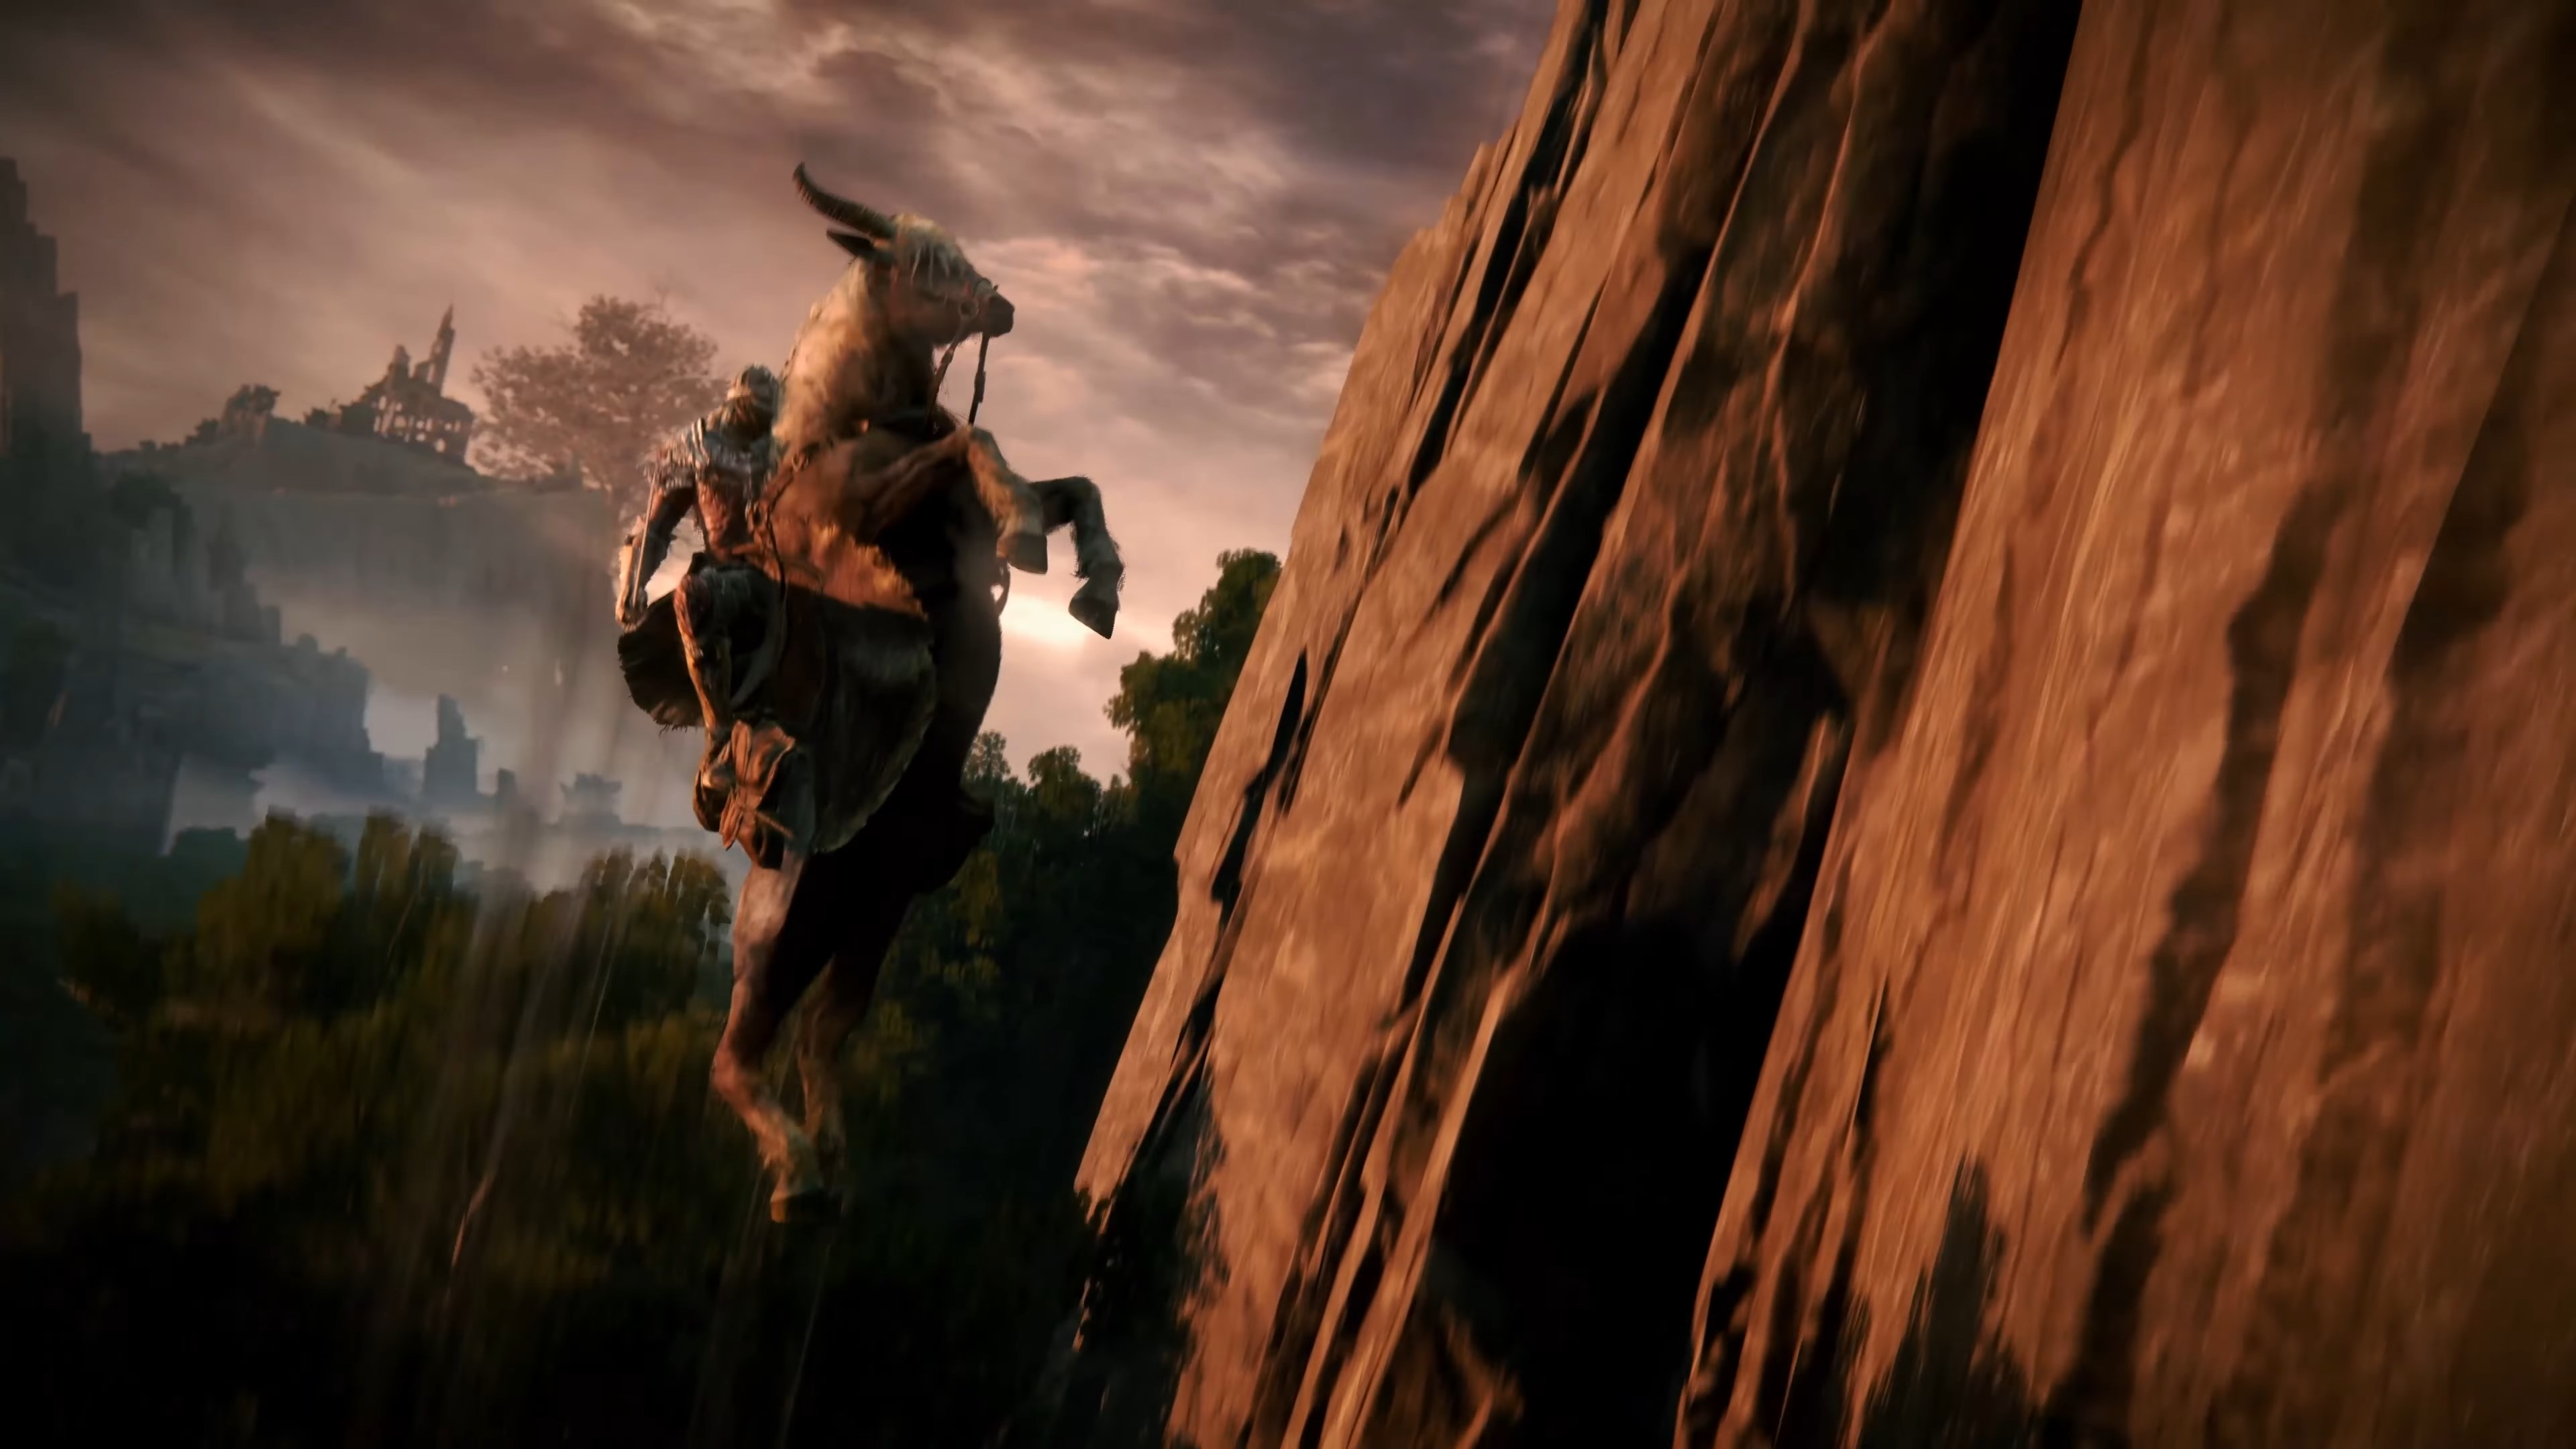 Elden Ring - A player on horseback jumps up the vertical edge of a cliff